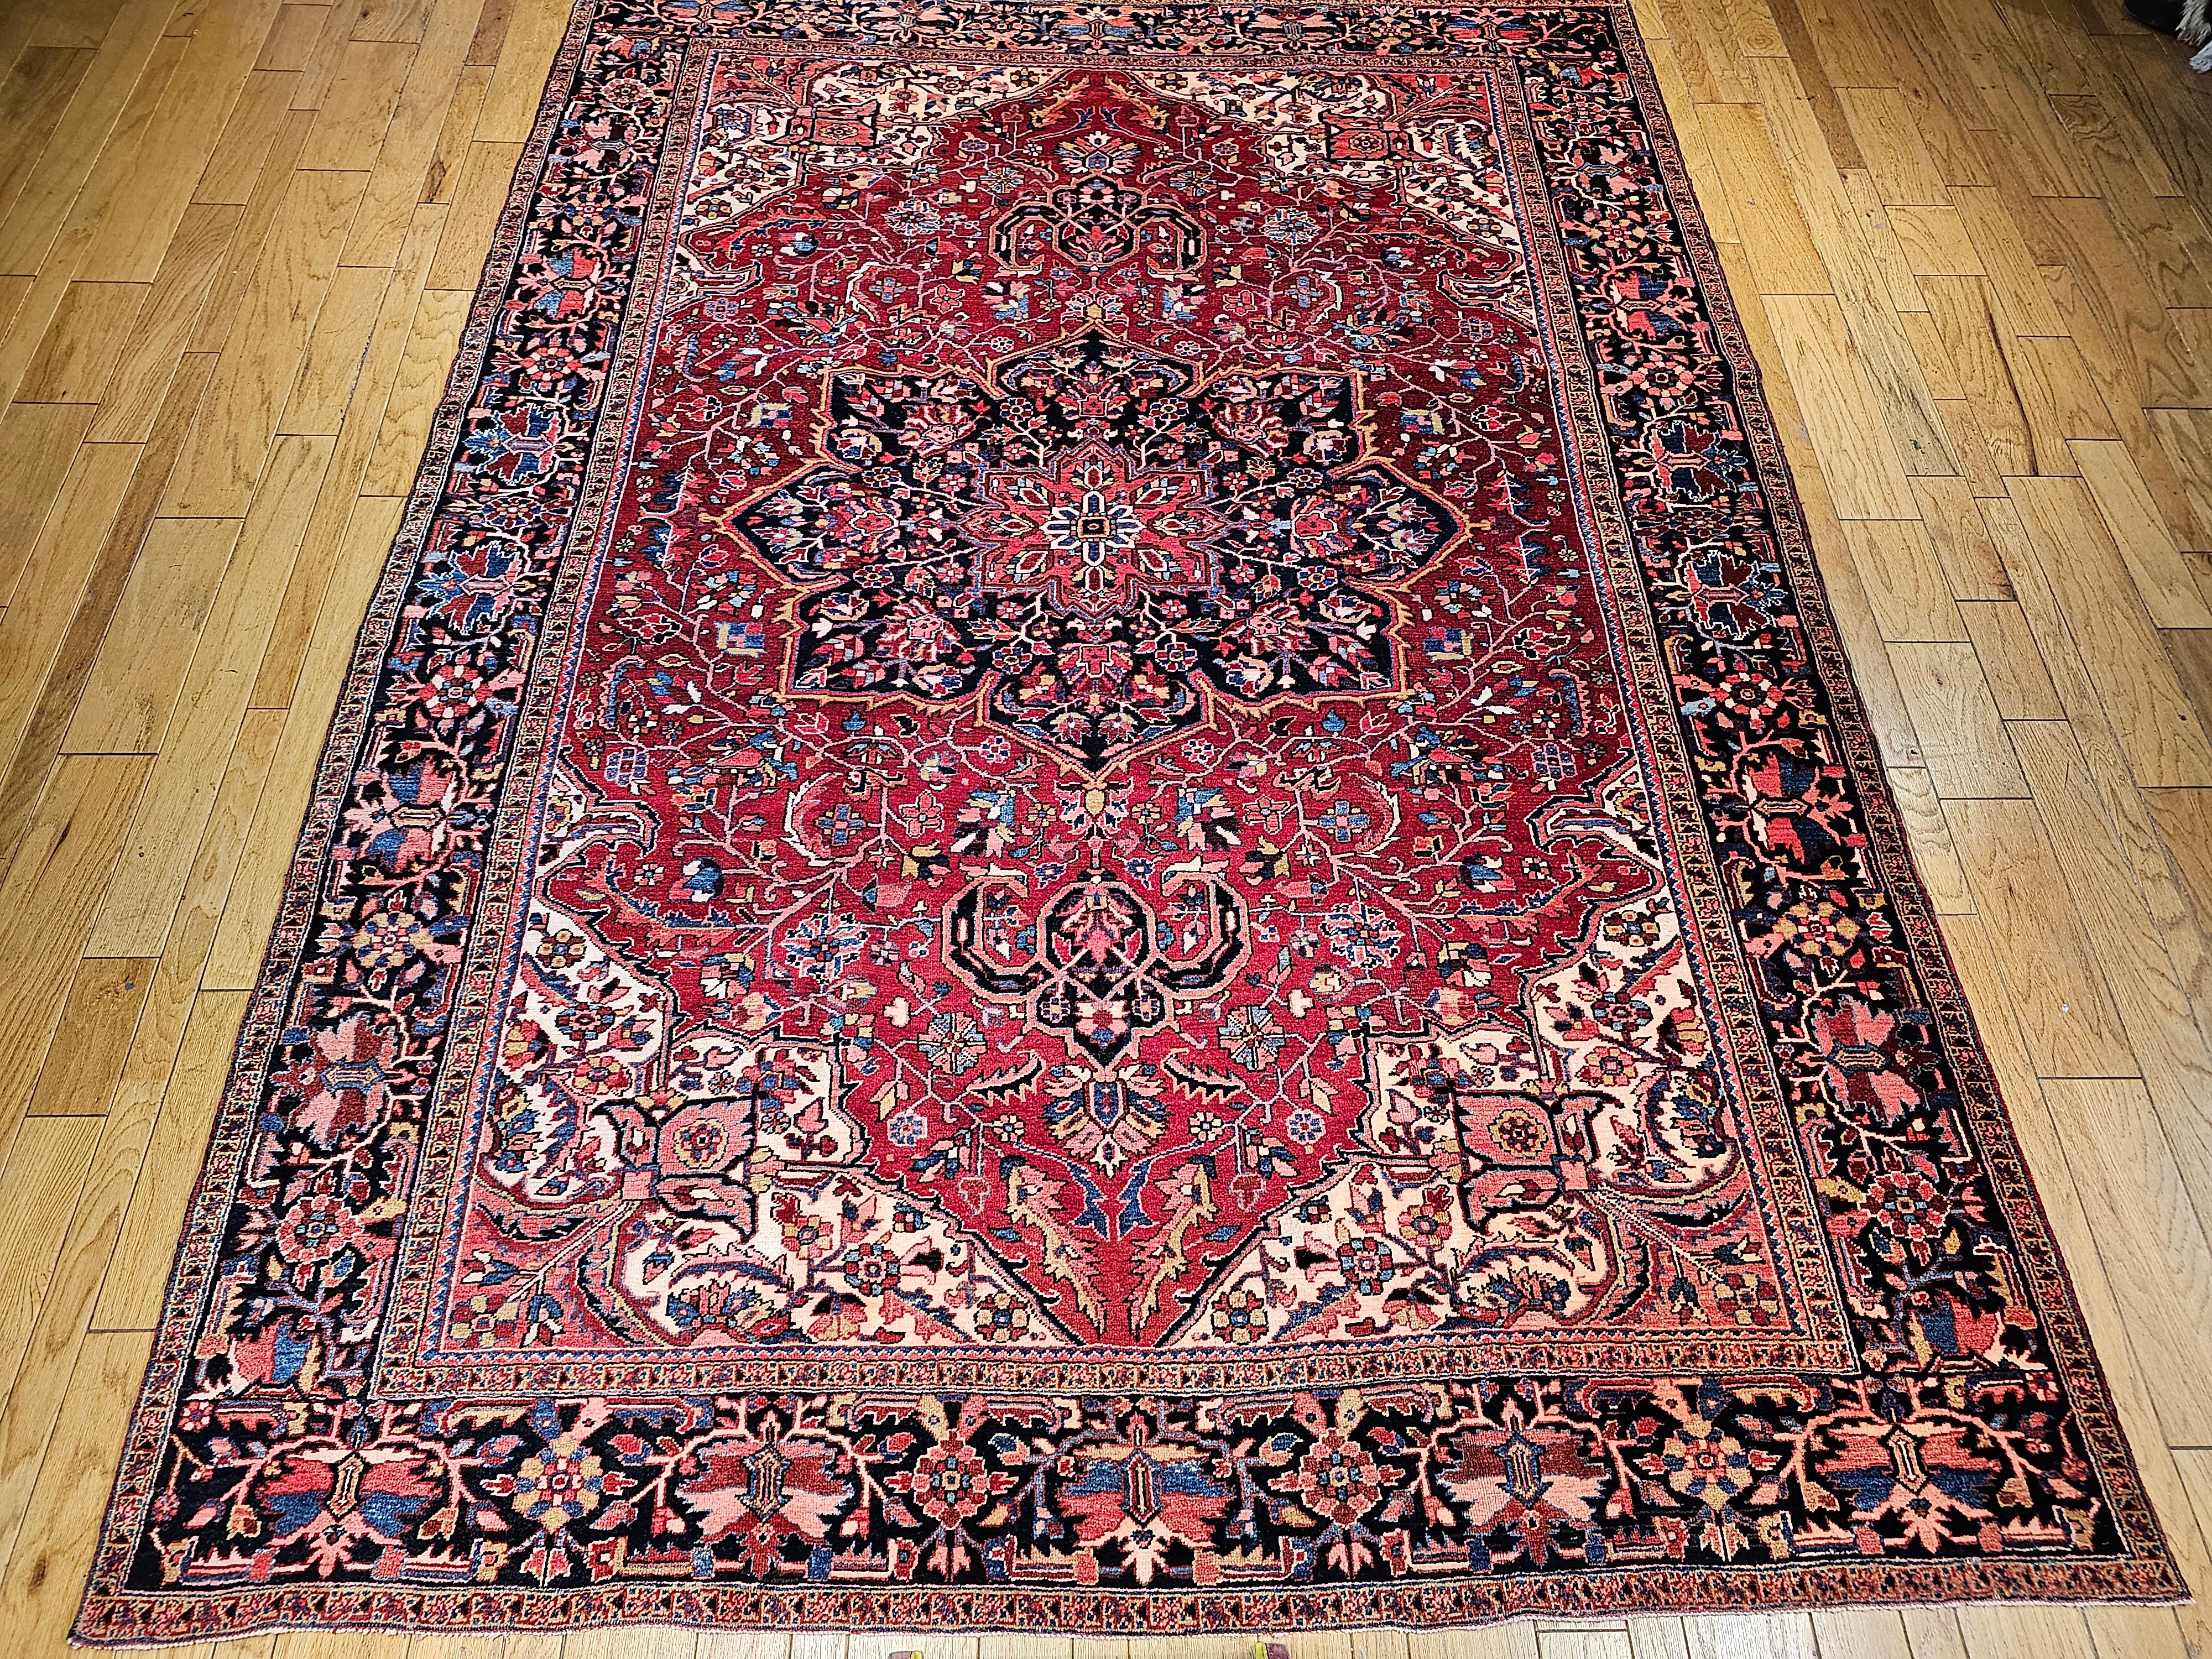 A room-size Heriz rug with Serapi colors from the Azerbaijan region of Northwest Persia. The Heriz rugs have ageless beauty and because of the use of natural dyes, they develop more beautiful color hues (abrash) over many generations of use. This